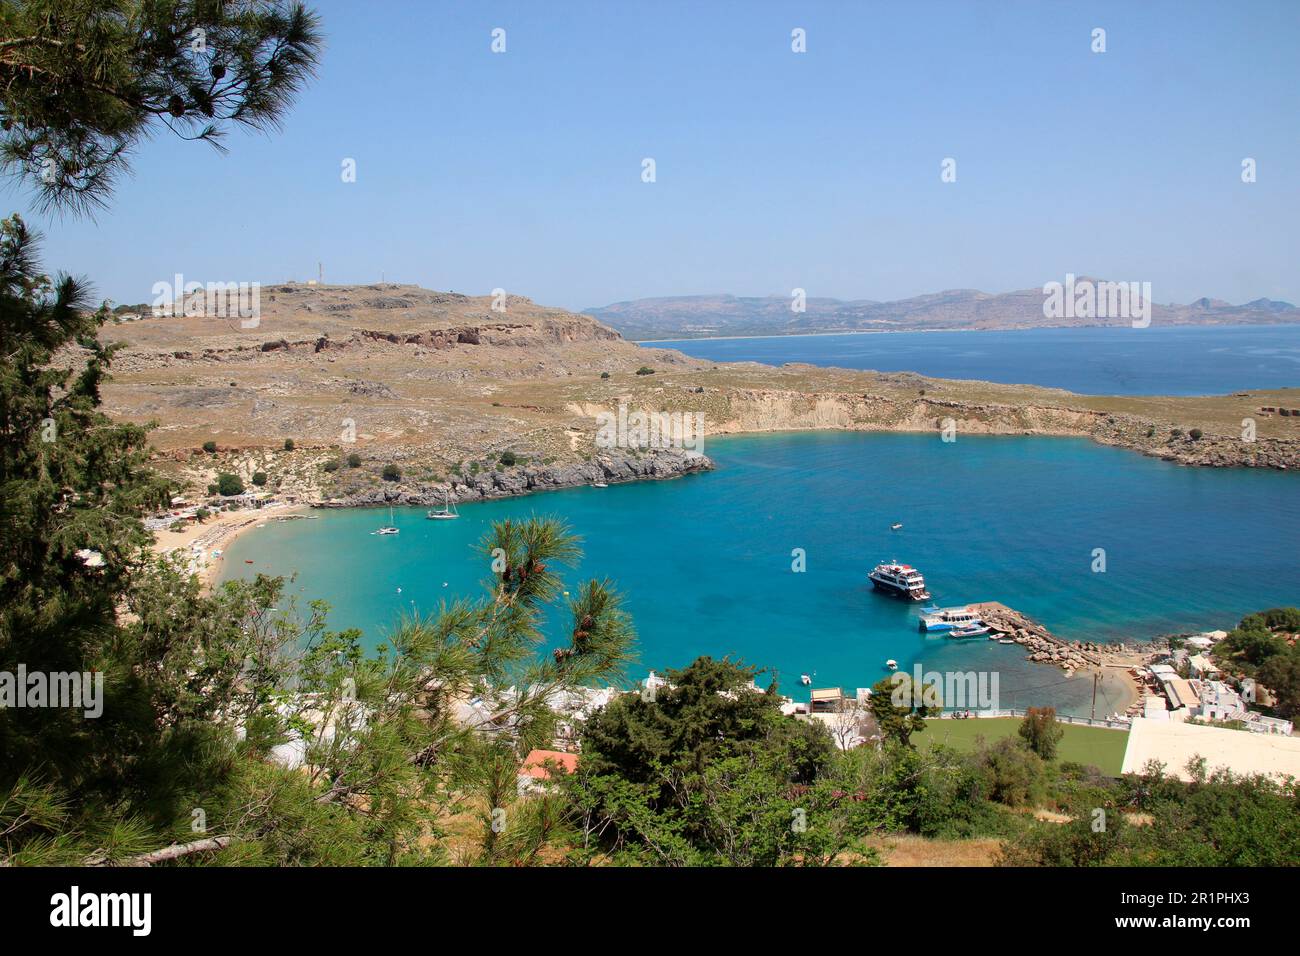 View from the Acropolis to the harbor, Lindos Bay, sea, seashore, Lindos, Rhodes, Dodecanese, Greece, grasses, atmospheric, blue sky Stock Photo